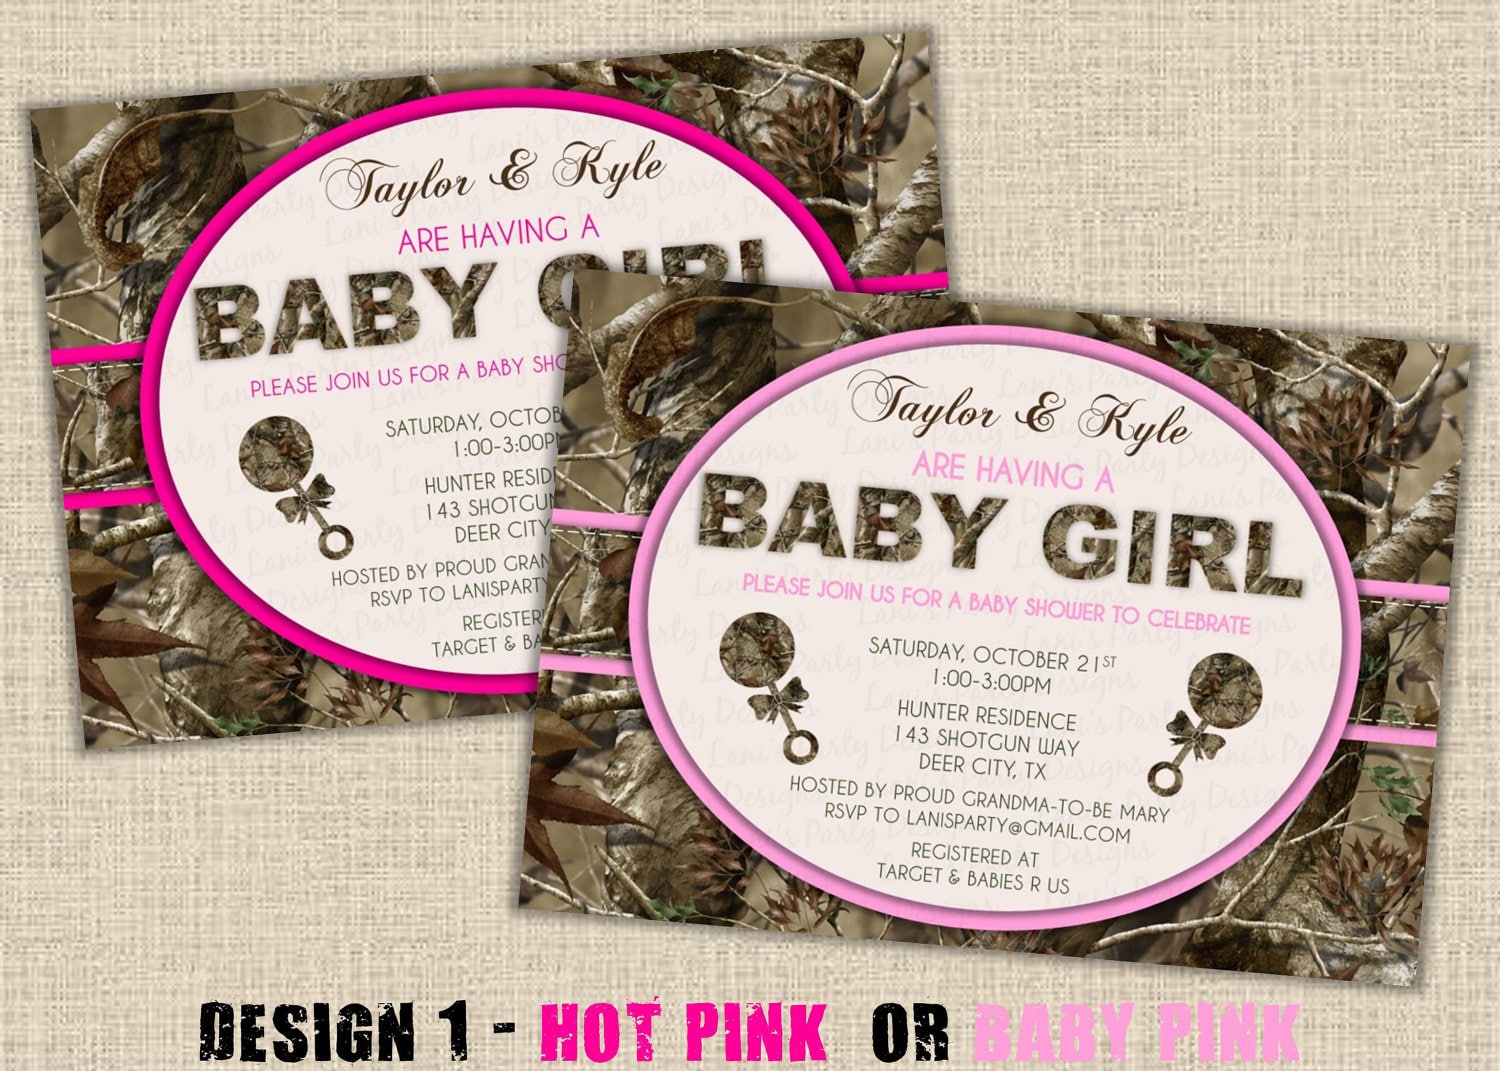 Baby Shower Food Ideas: Baby Shower Ideas Pink Camo